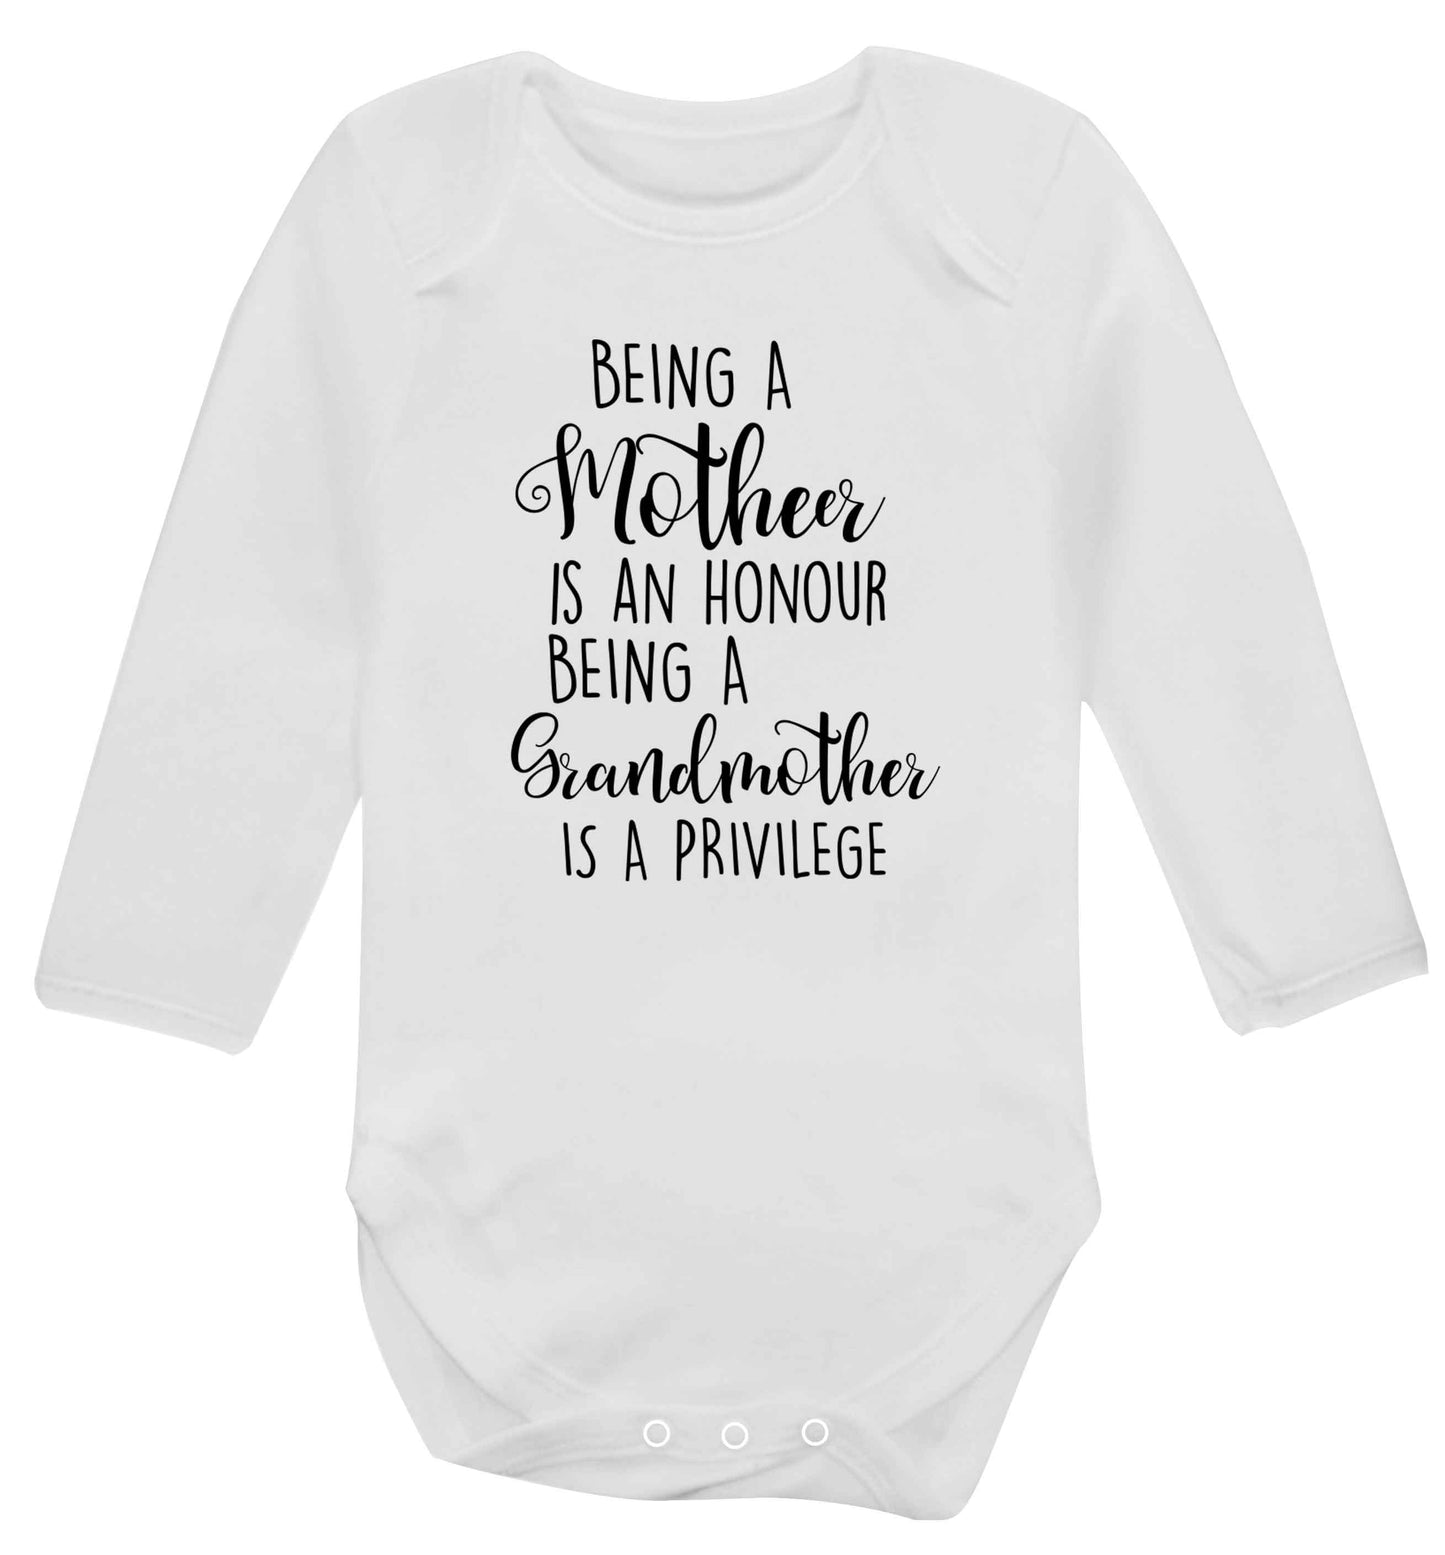 Being a mother is an honour being an grandmother is a privilege Baby Vest long sleeved white 6-12 months